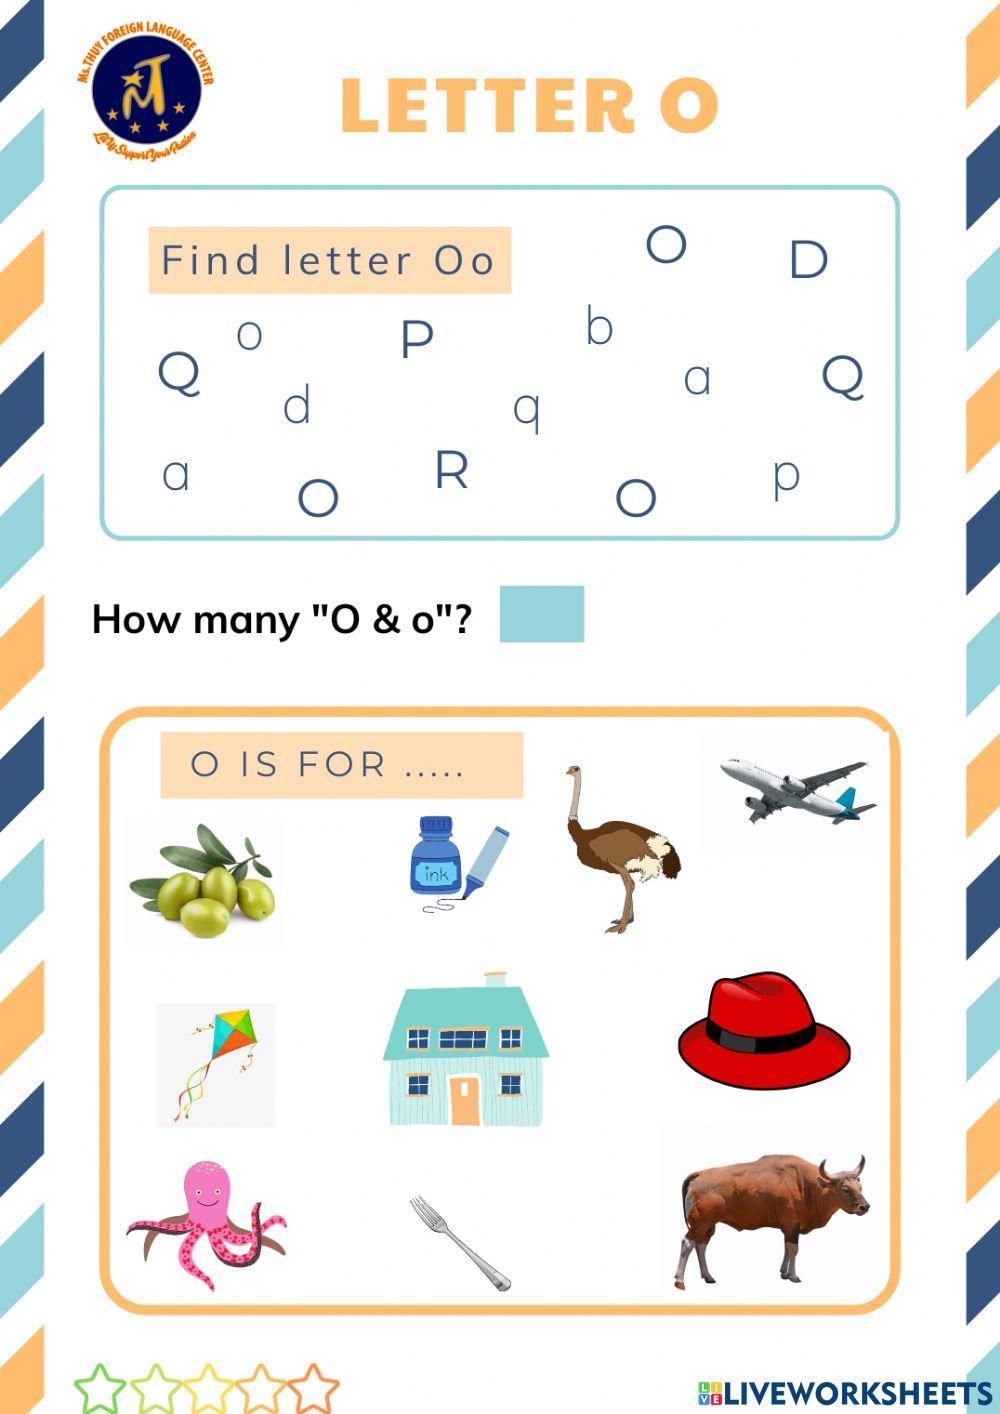 Find Letter Oo